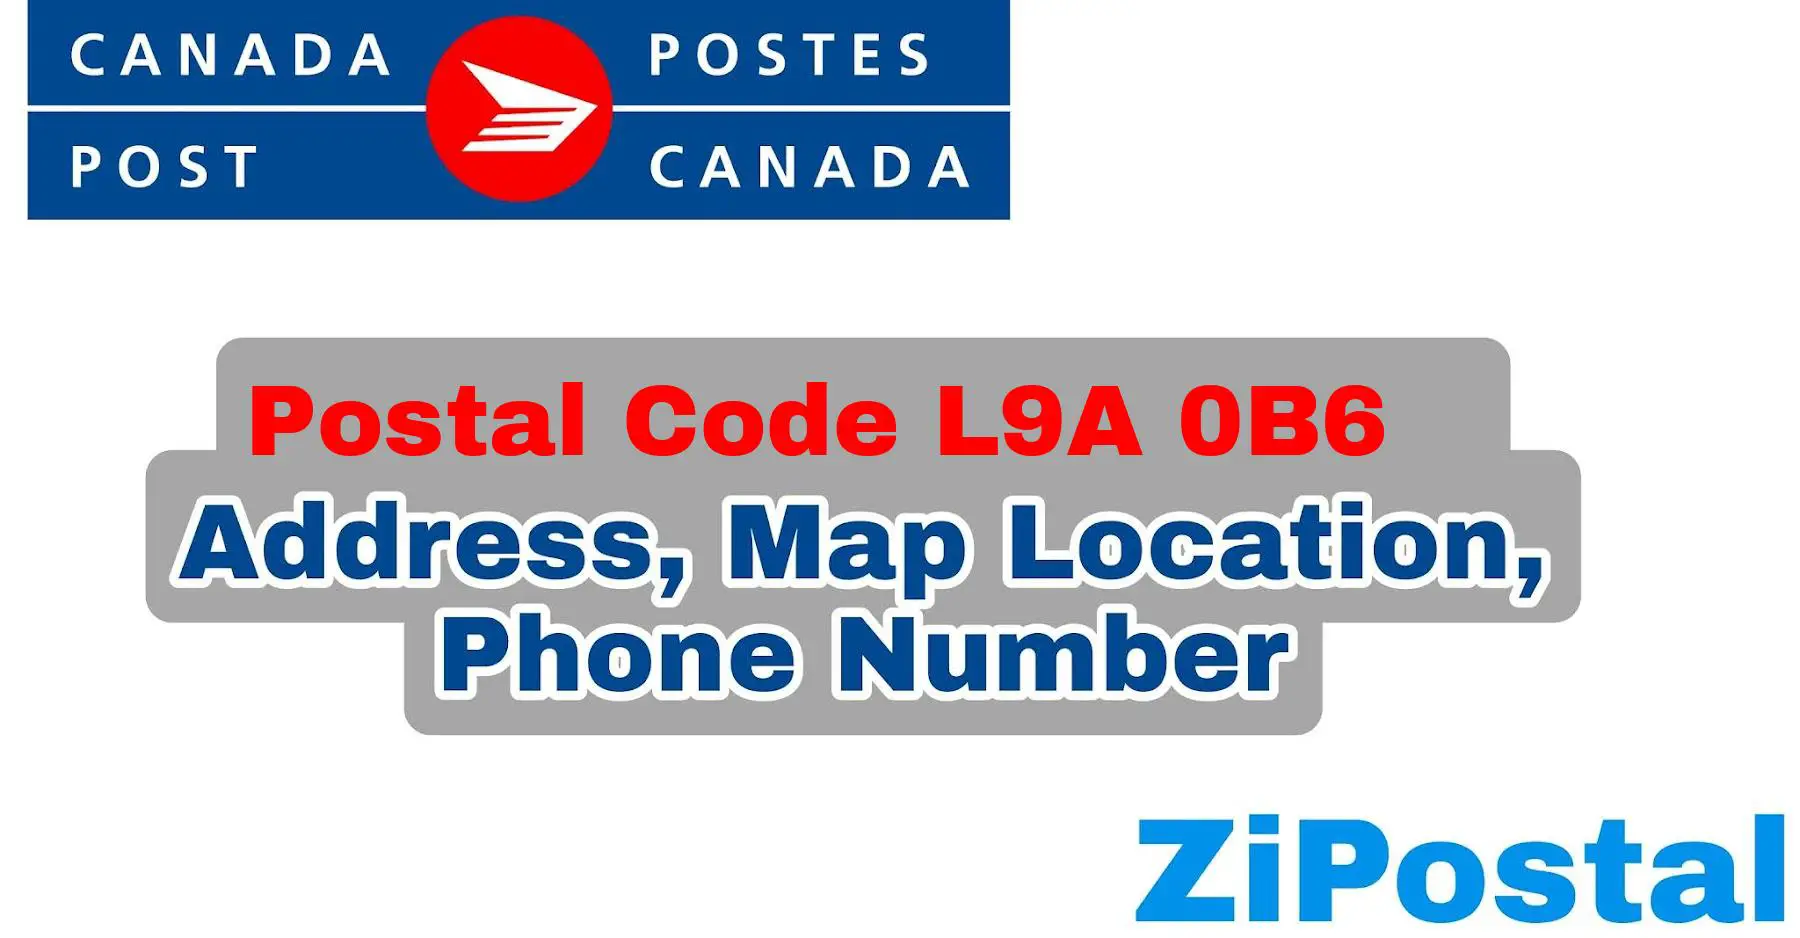 Postal Code L9A 0B6 Address Map Location and Phone Number